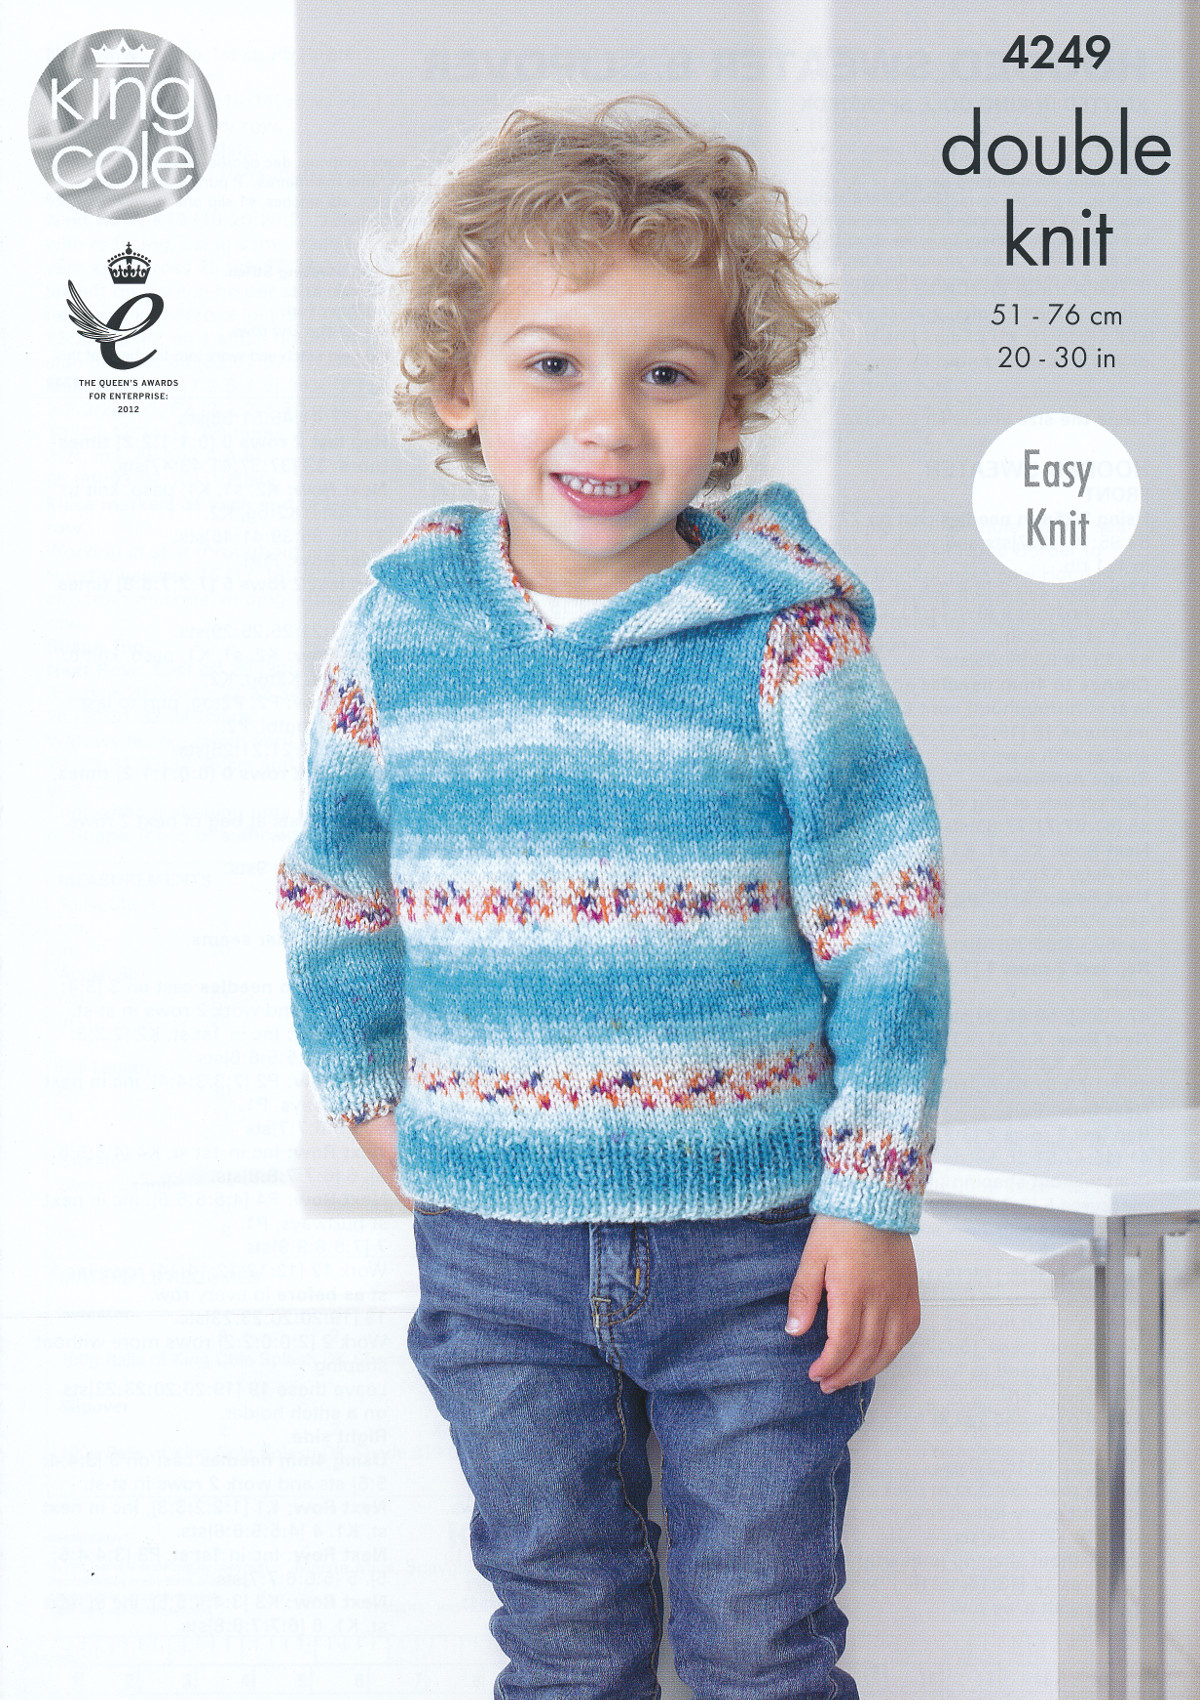 Hooded Jumper Knitting Pattern Details About King Cole Dk Double Knitting Pattern Childrens Boys Hooded Sweater Slipover 4249